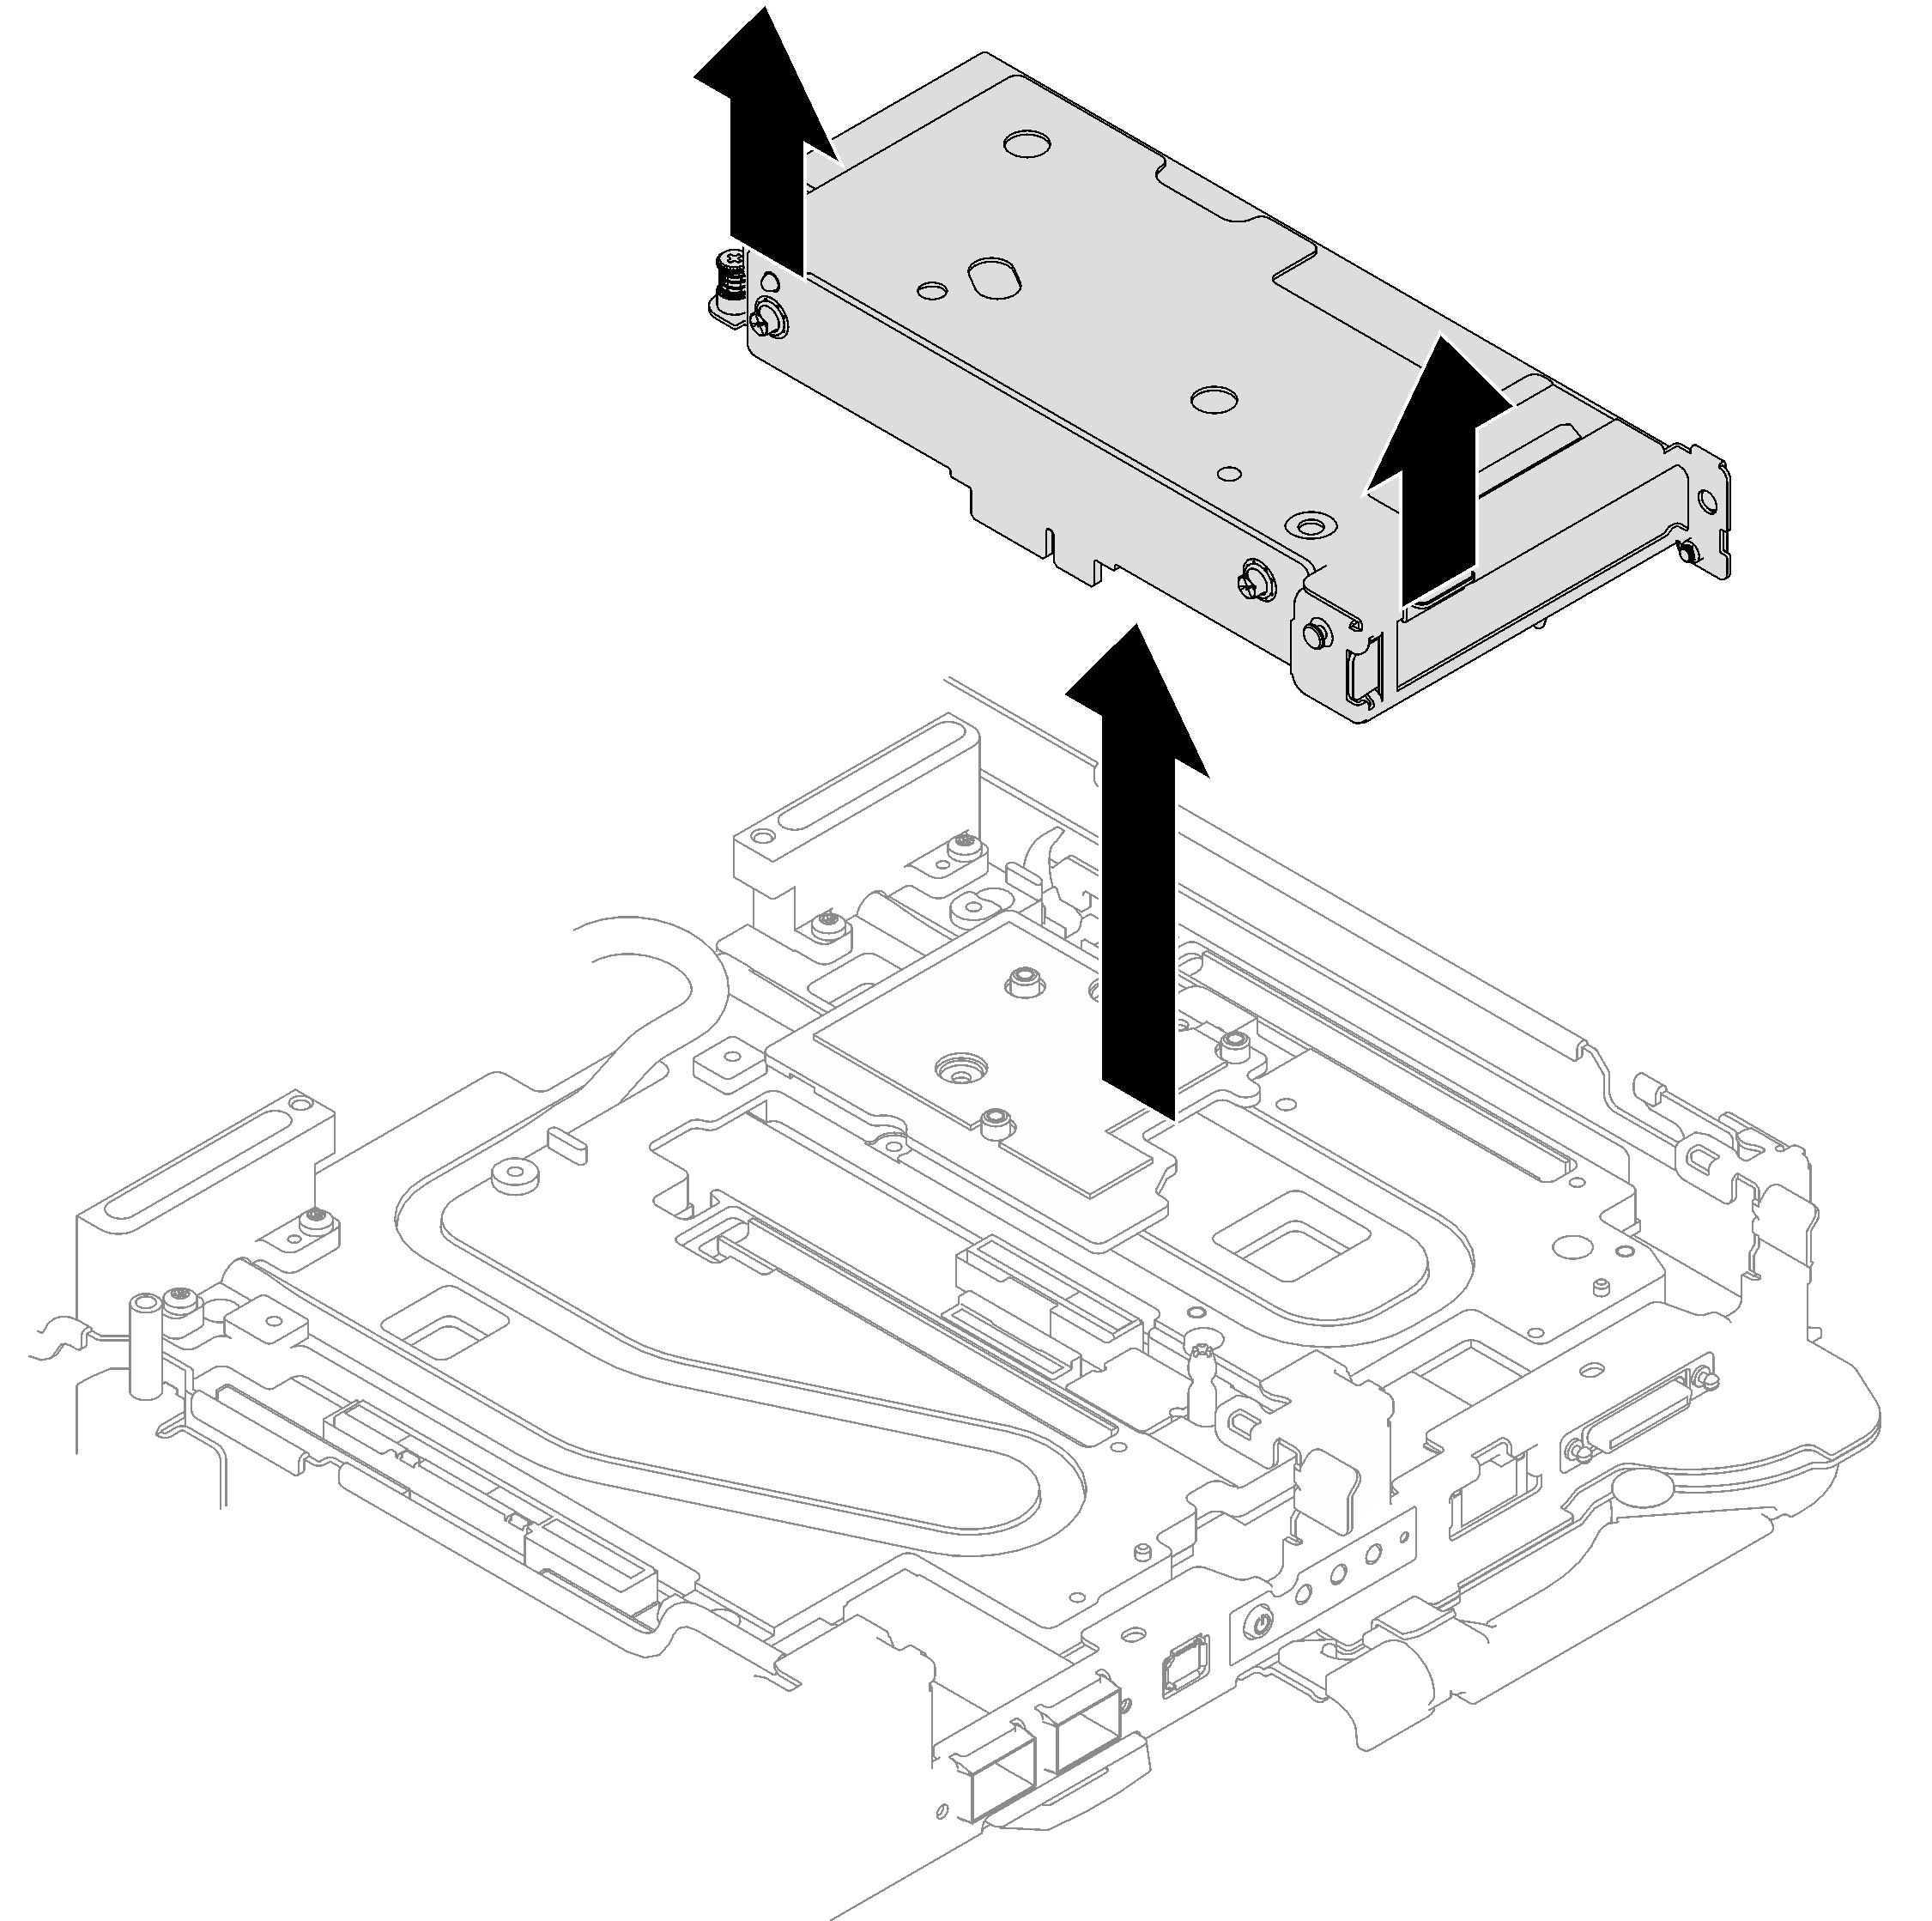 Removing the PCIe riser cage assembly